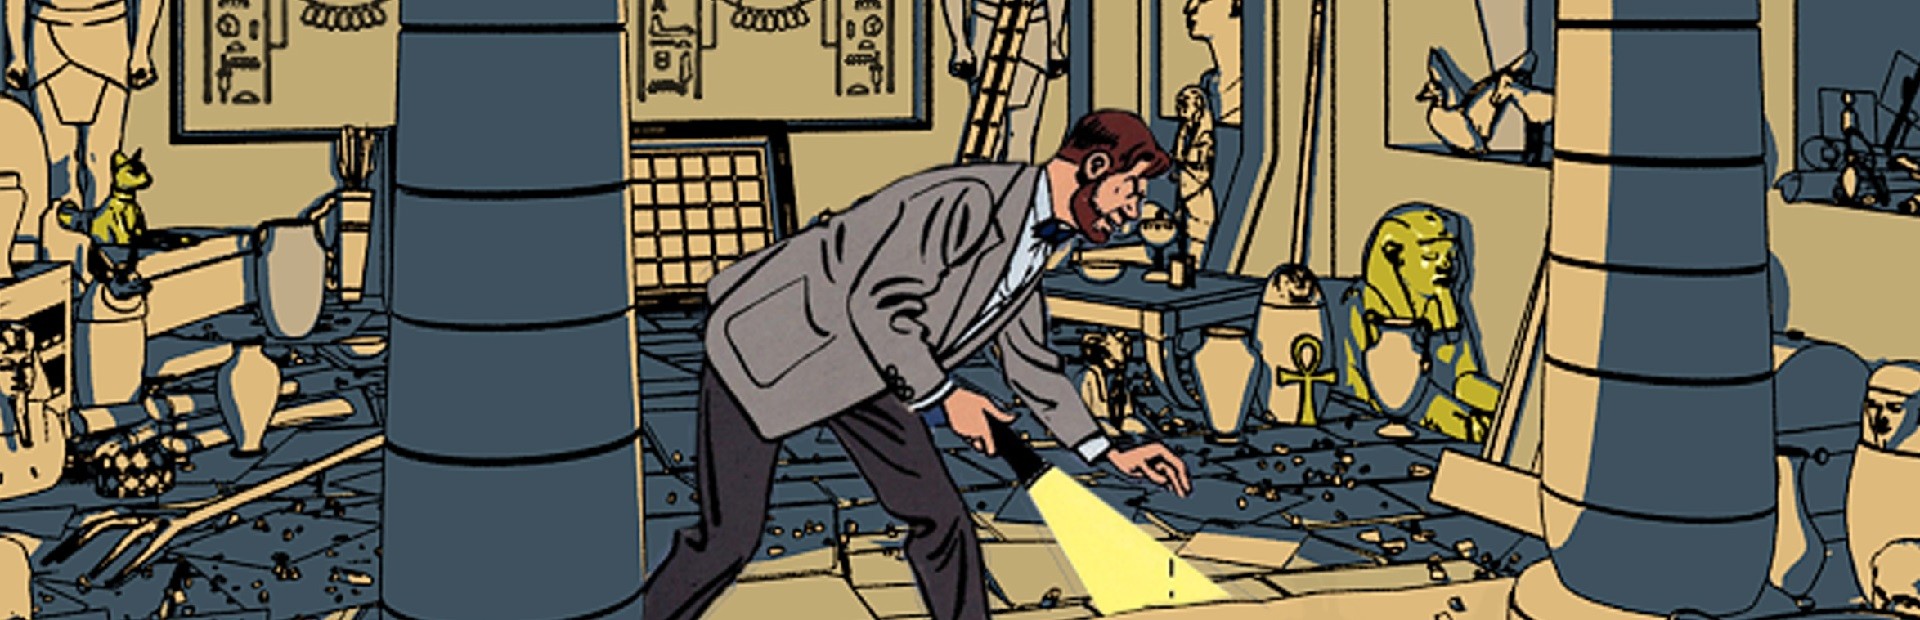 Blake and Mortimer: The Curse of the Thirty Denarii cover image